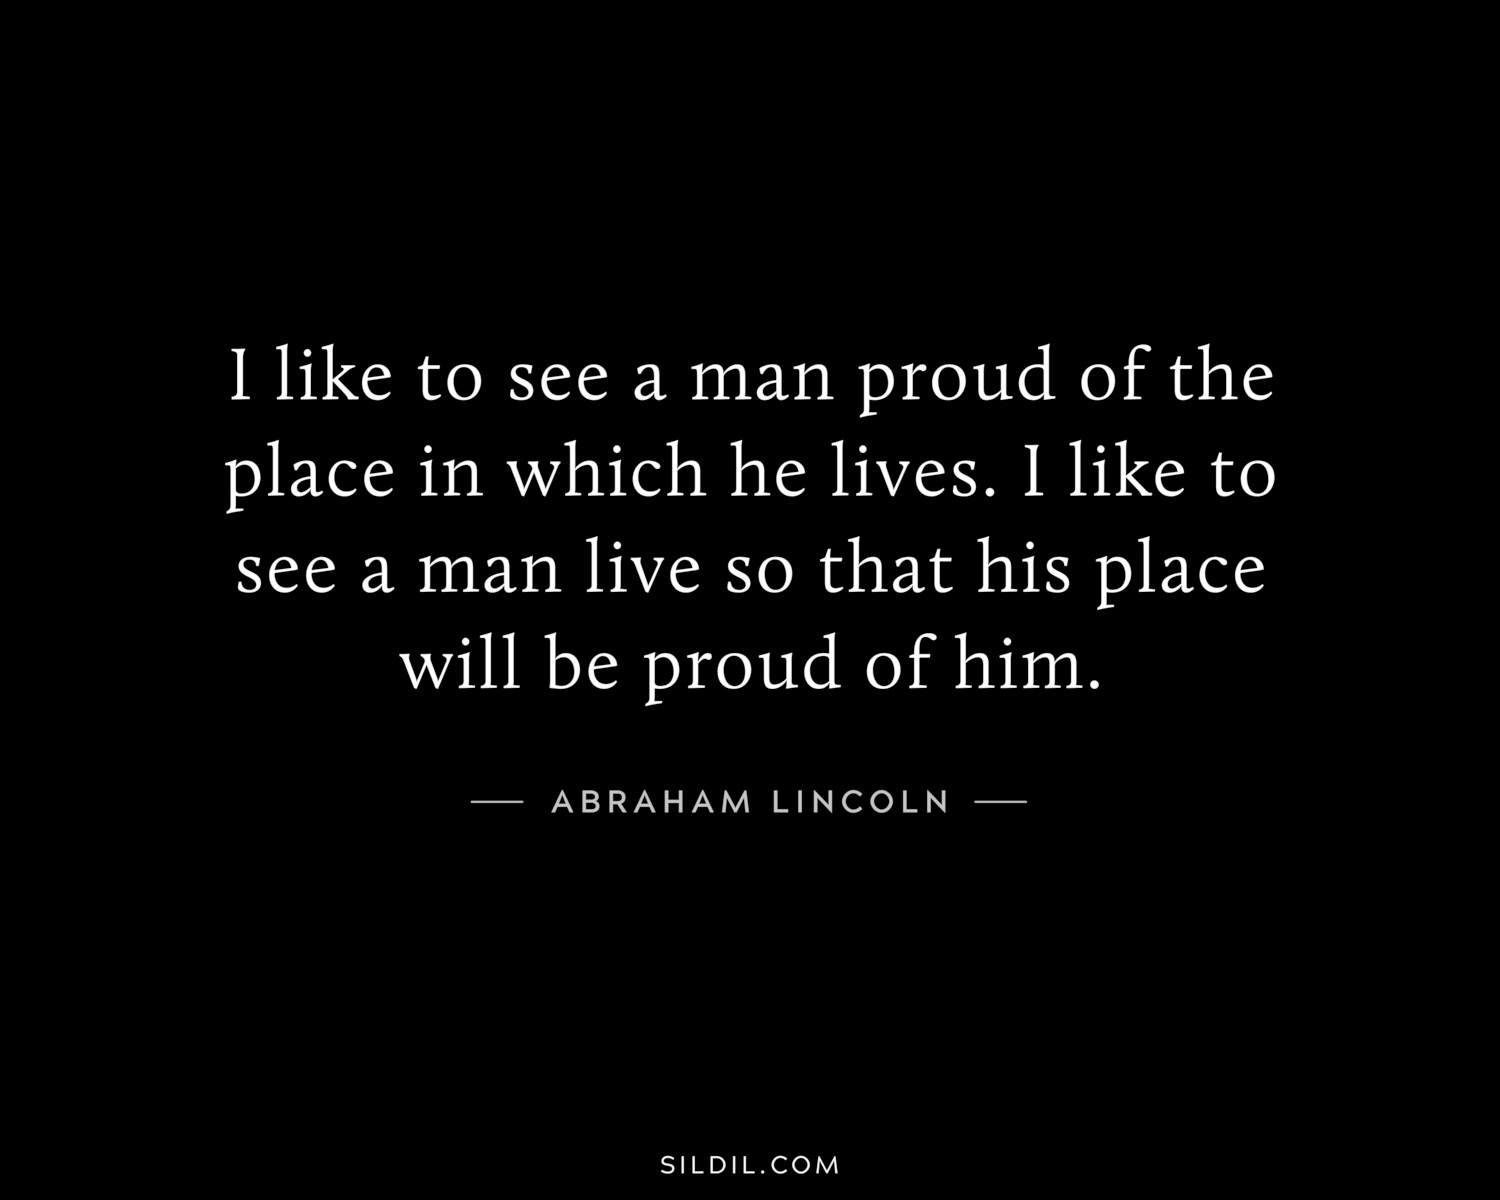 I like to see a man proud of the place in which he lives. I like to see a man live so that his place will be proud of him.